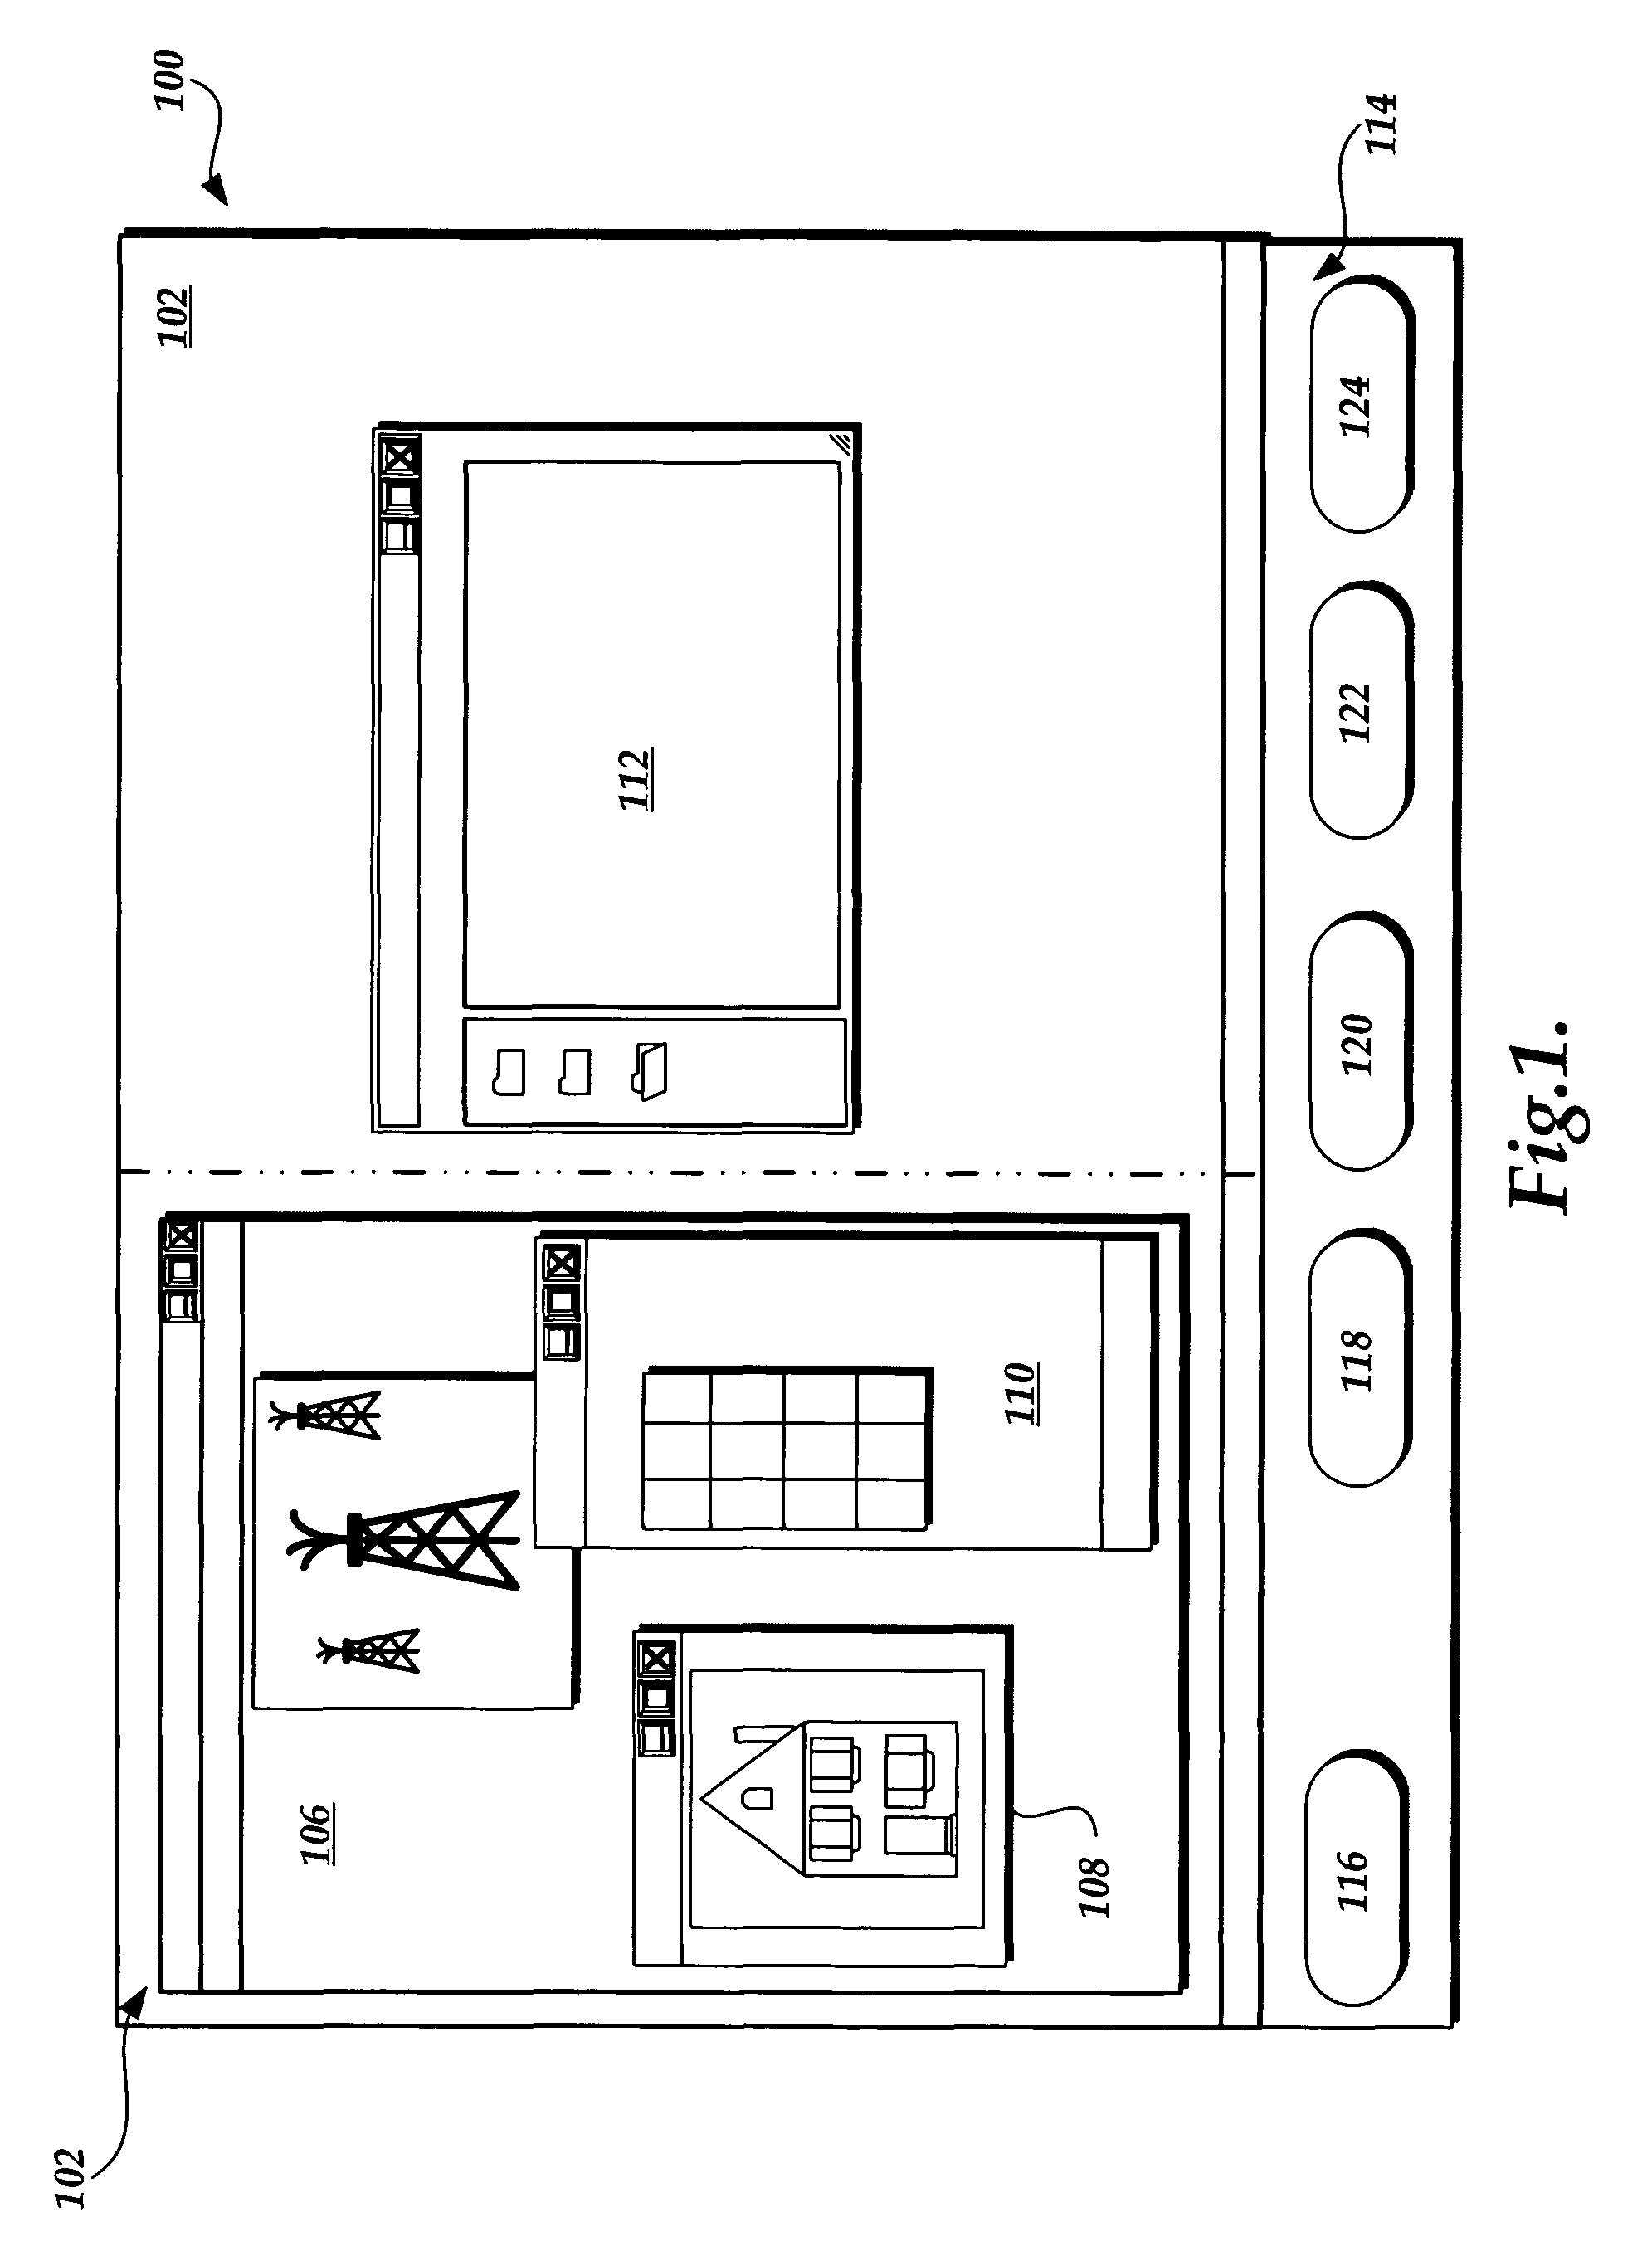 System and method for managing software applications in a graphical user interface